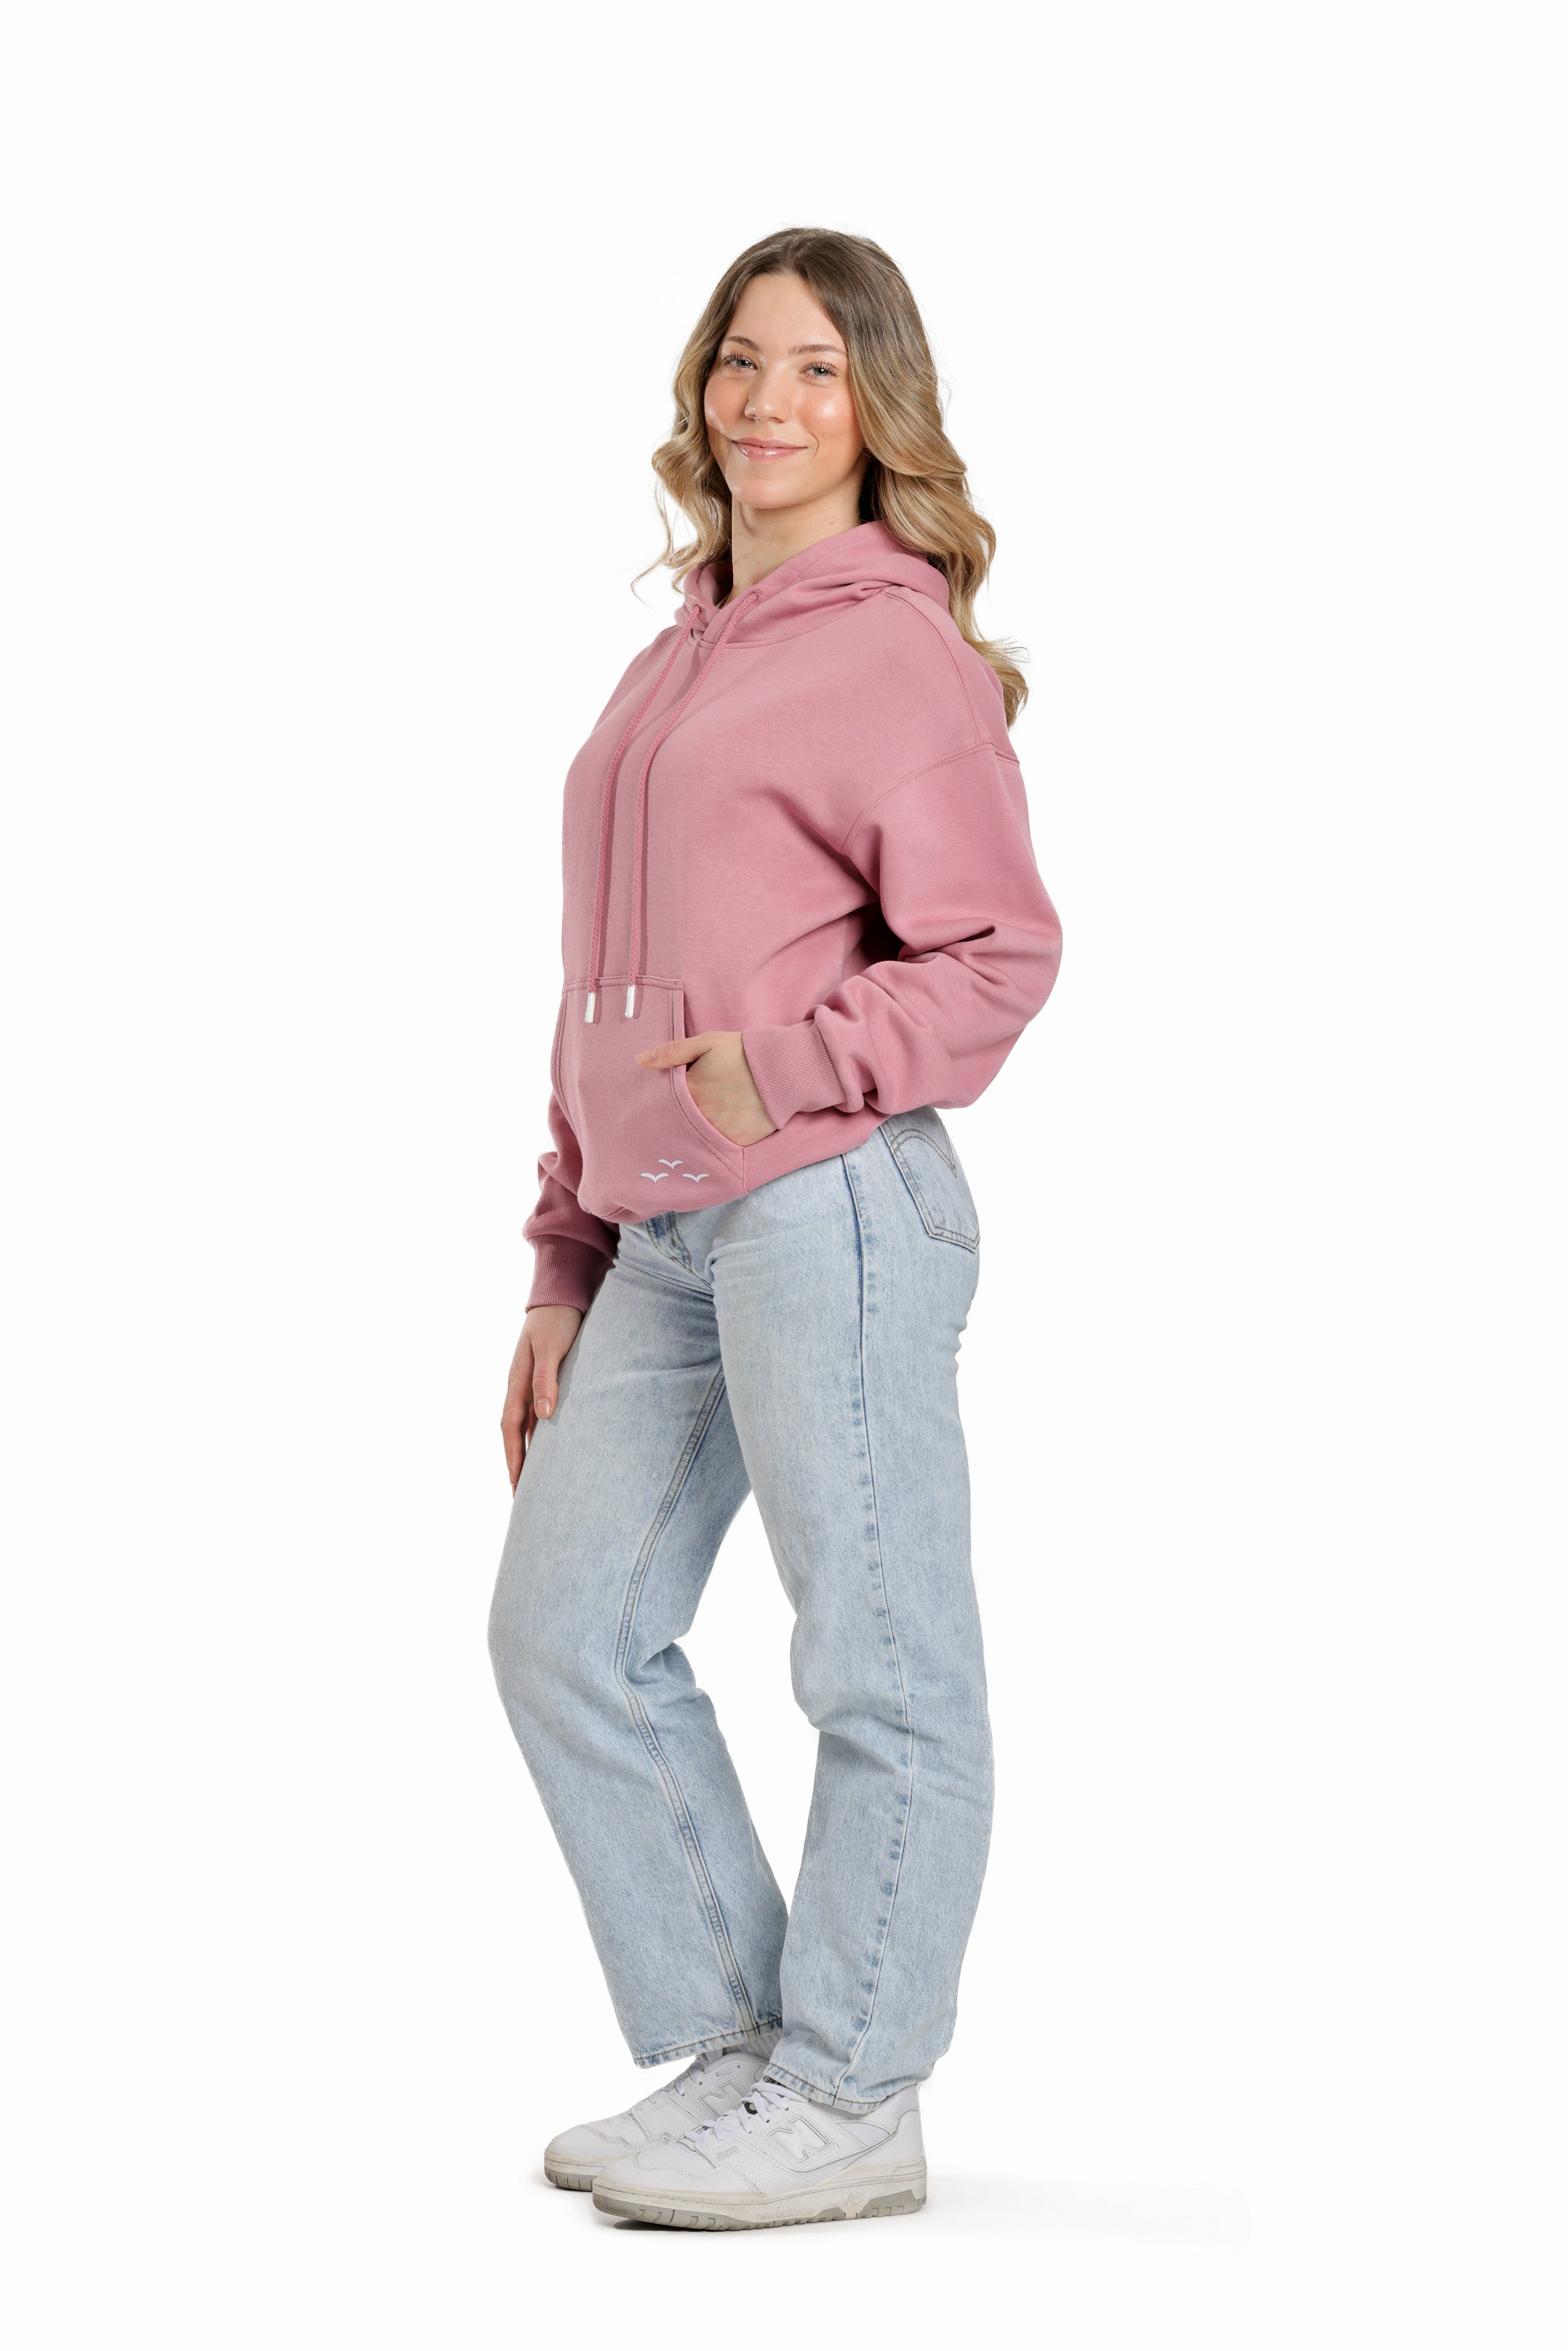 Chlo Relaxed Fit Hoodie in orchid pink